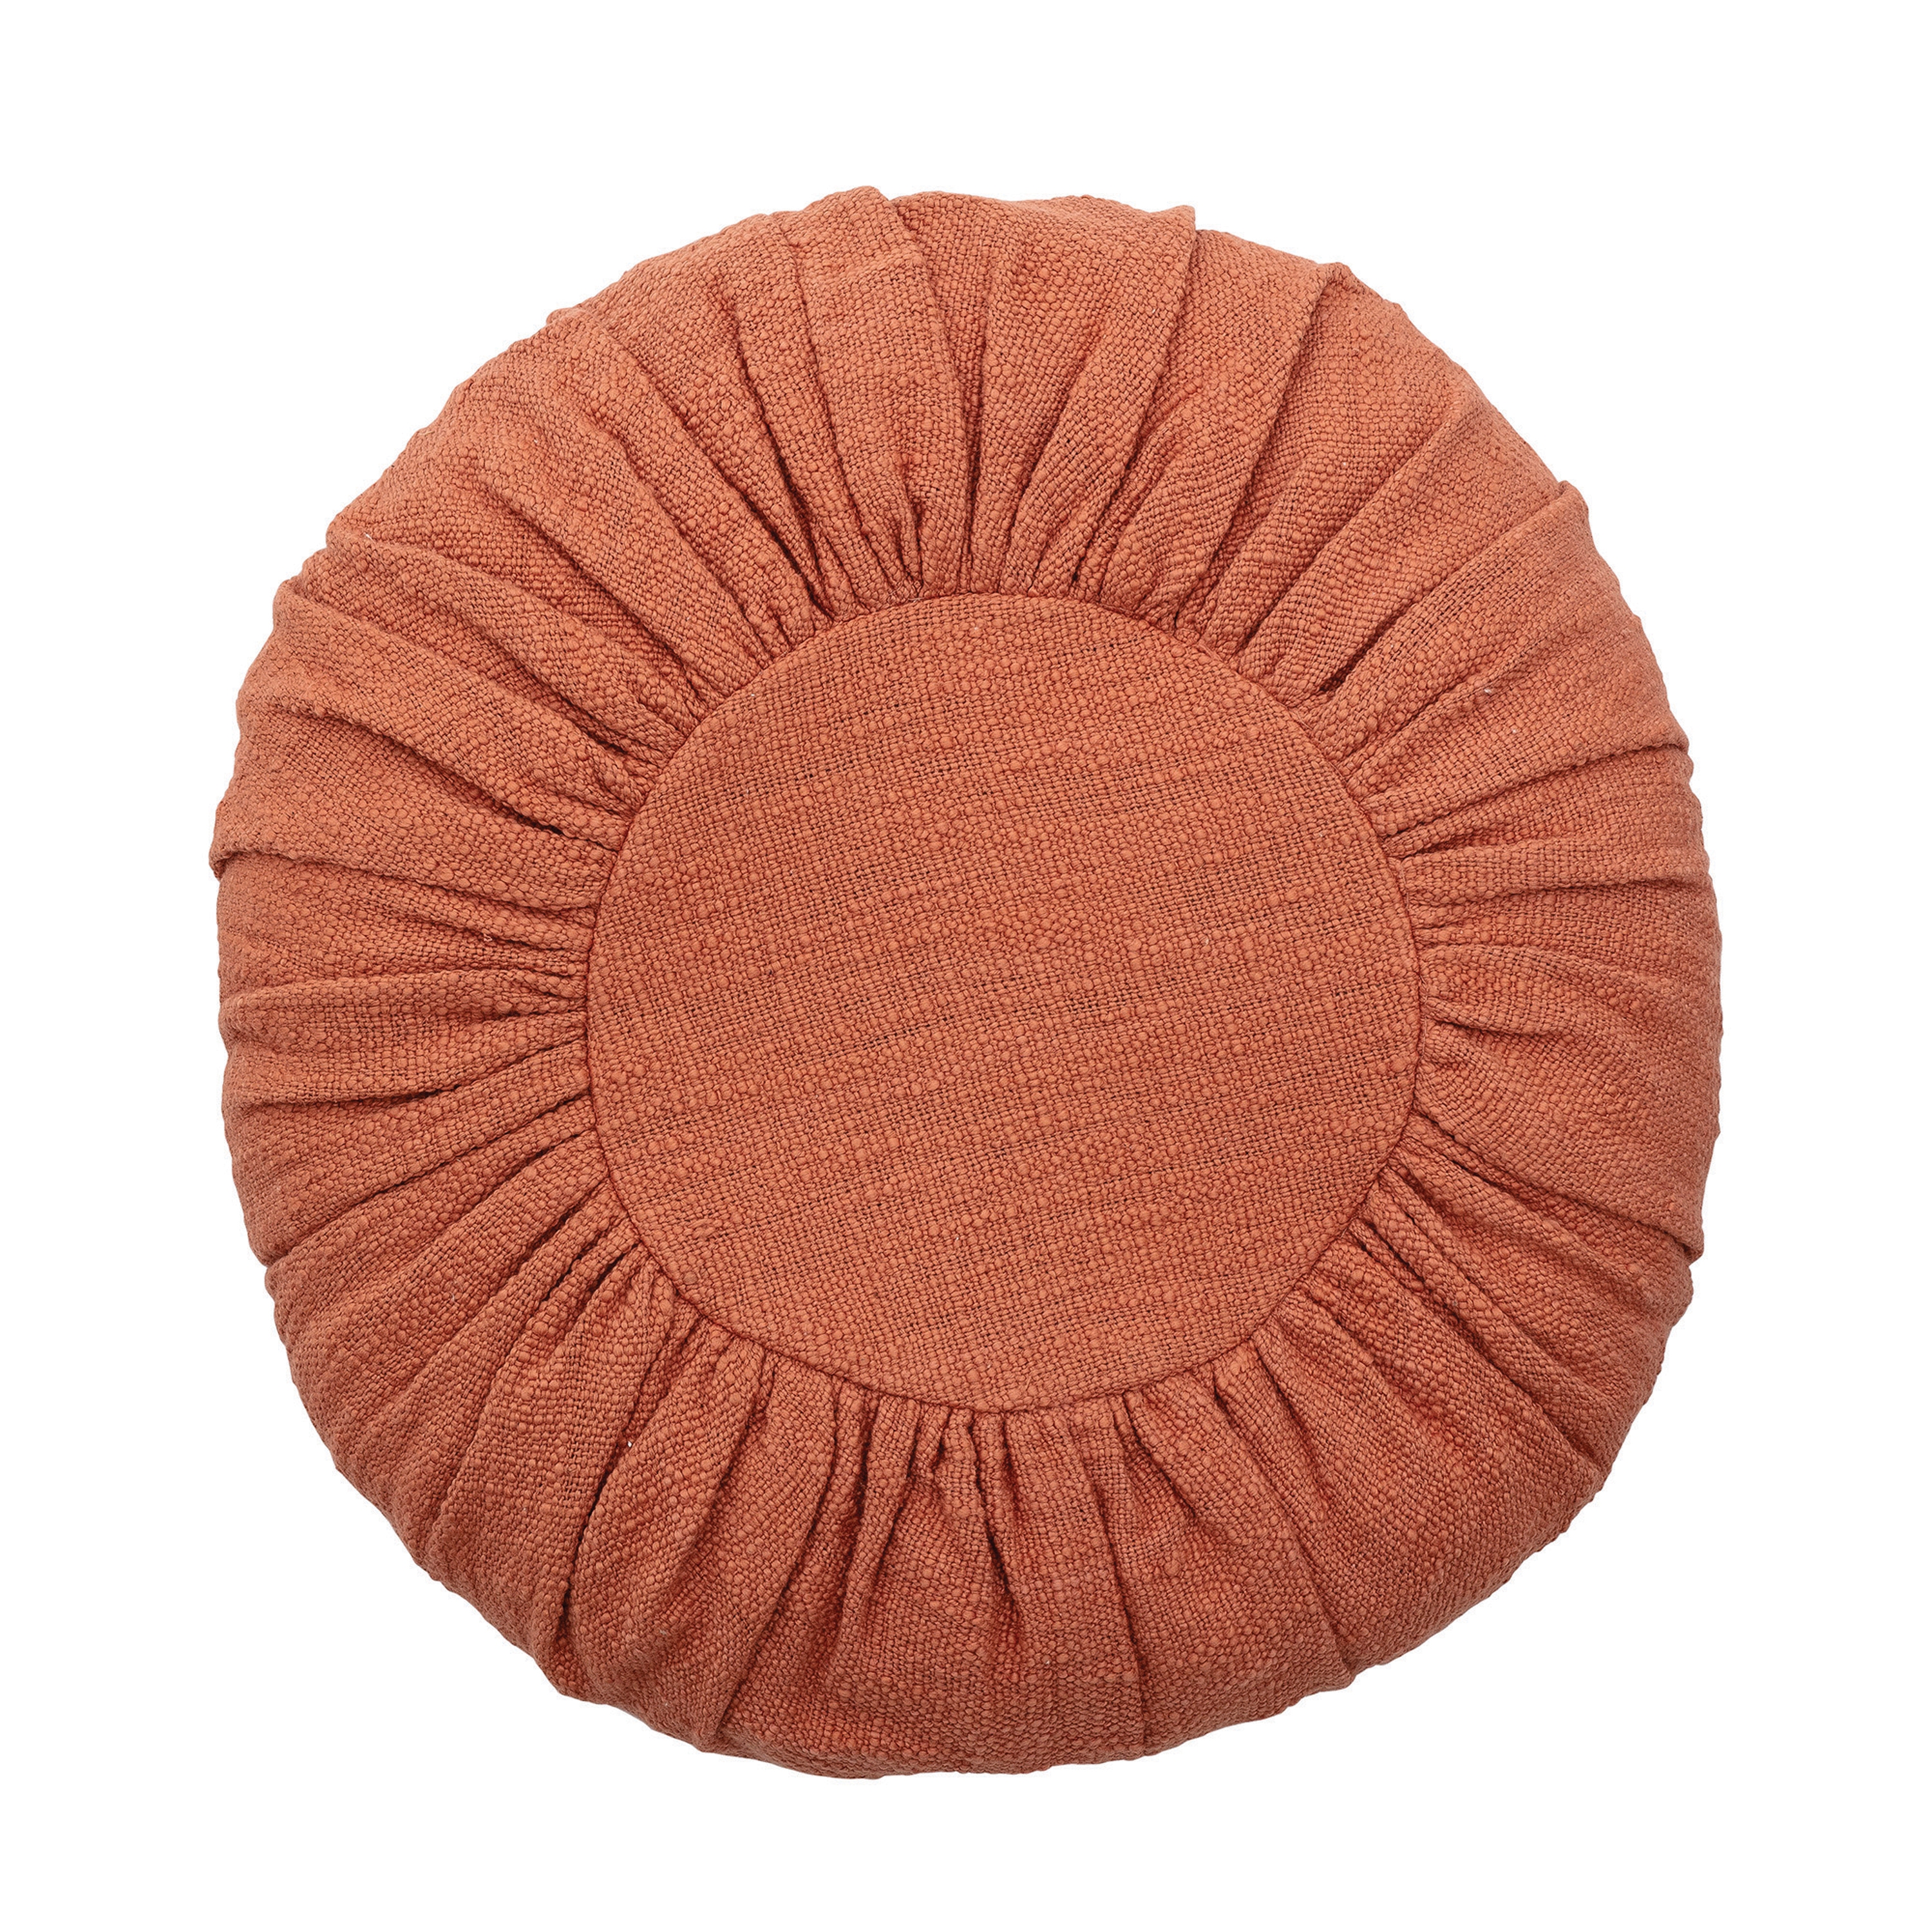 18" Round Cotton Pillow with Gathered Design - Image 0